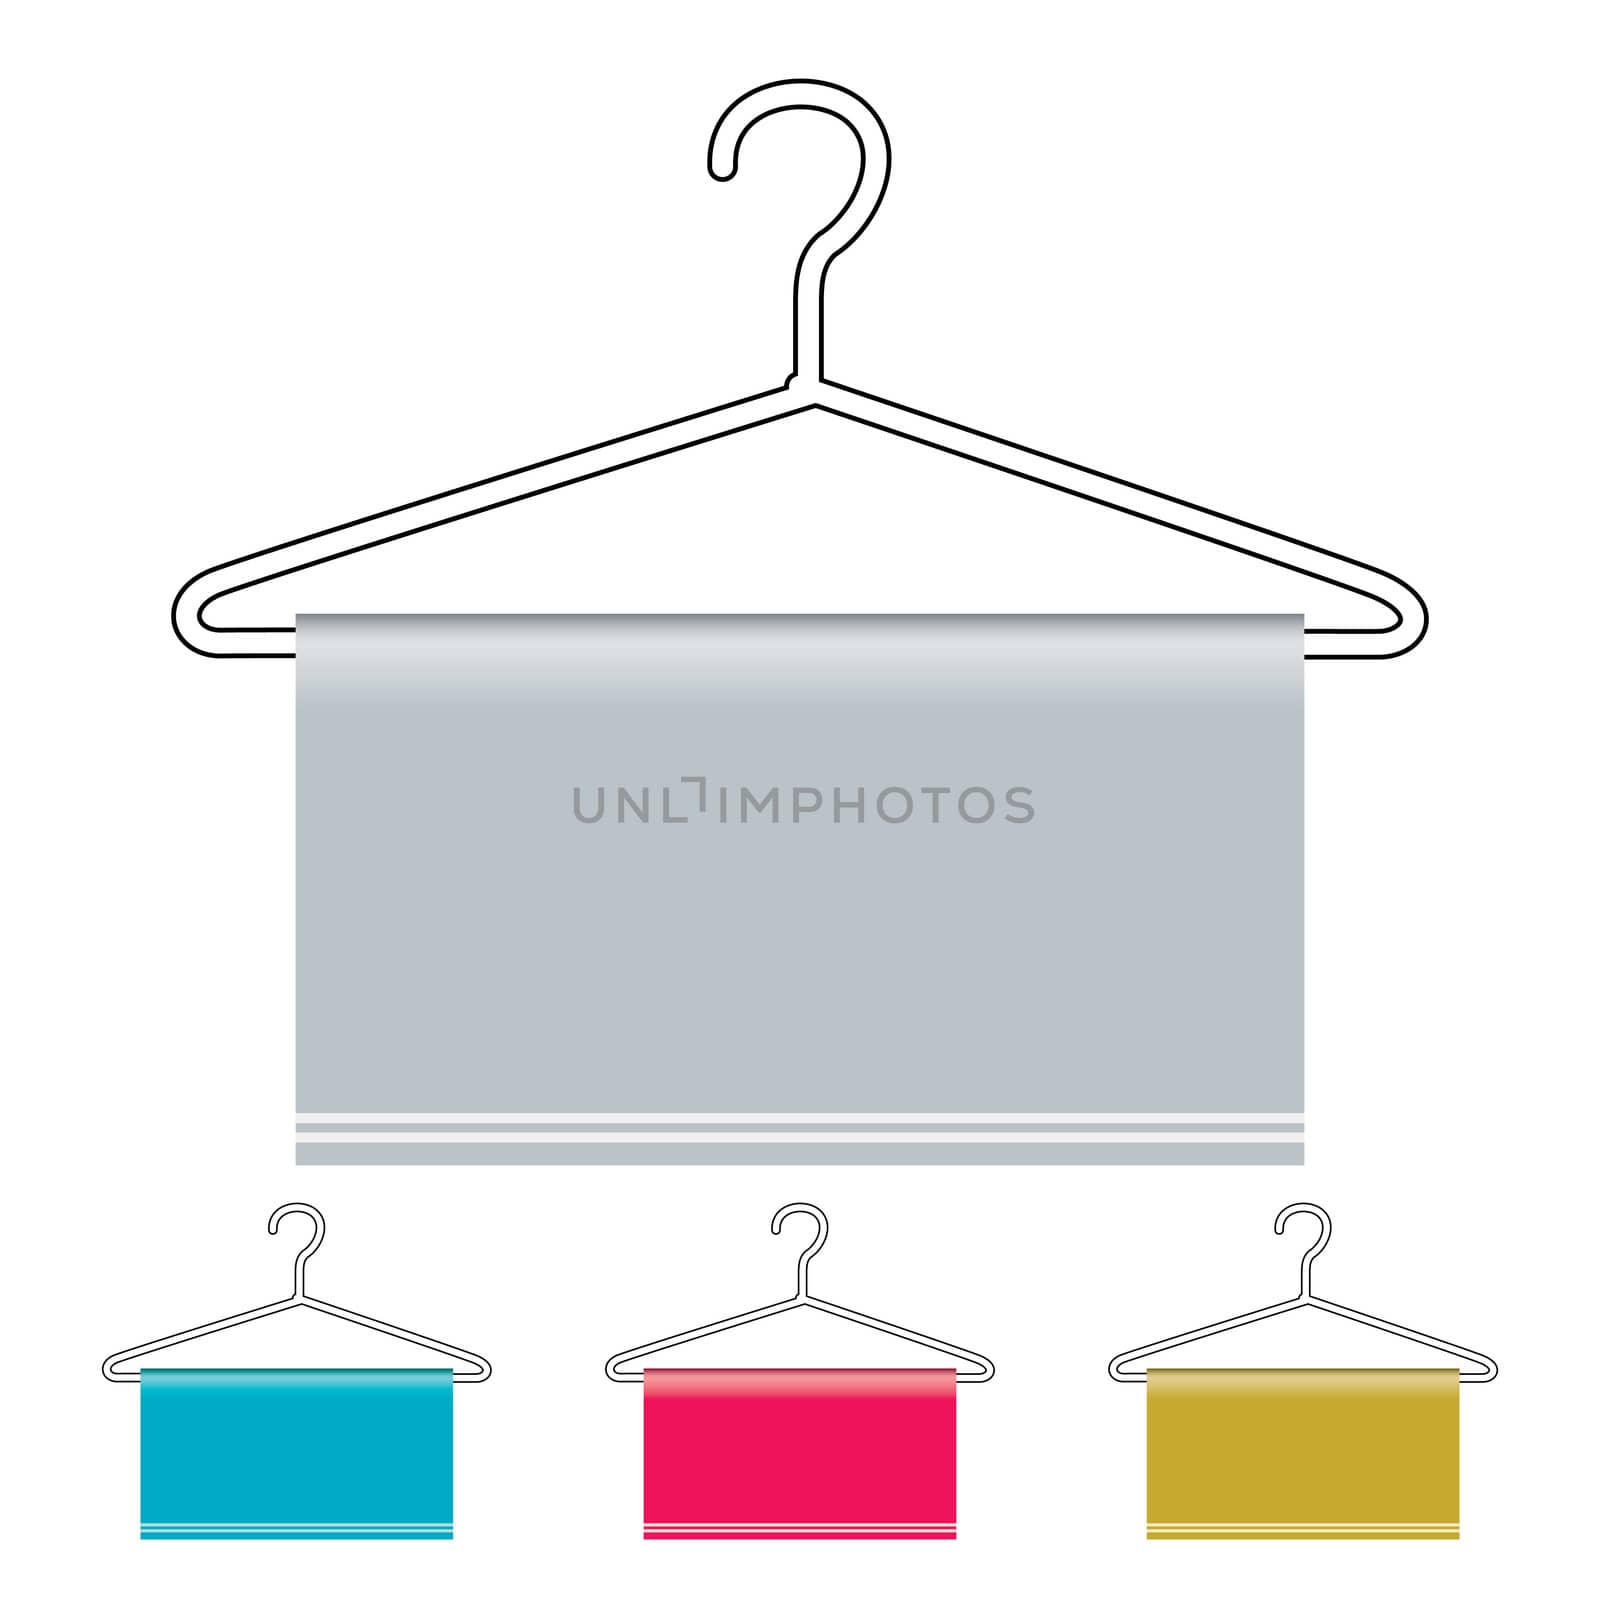 Outline coat hanger with material draped over and copy space